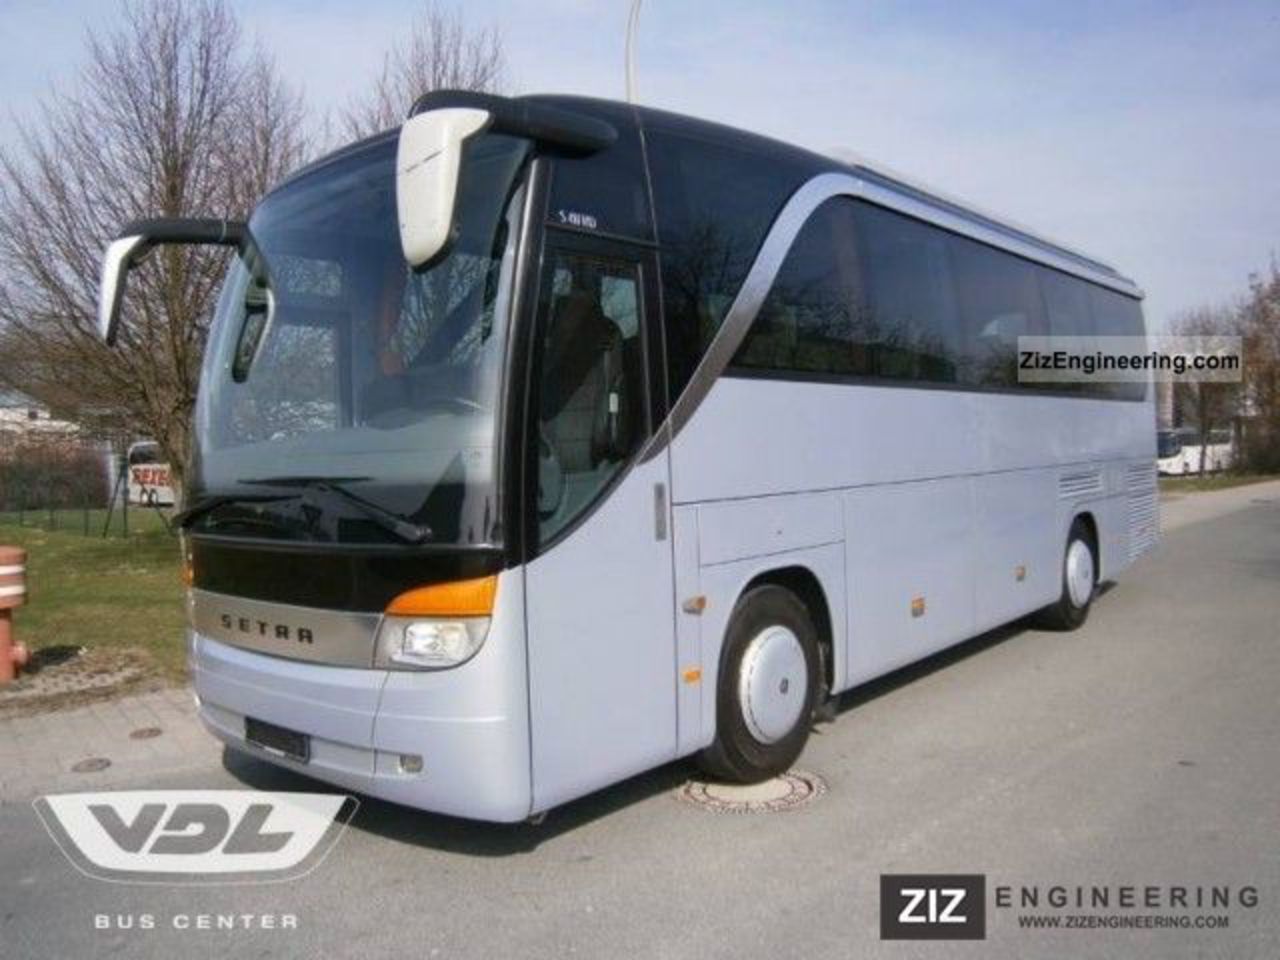 Setra S 411 HD 2006 Coaches Photo and Specs